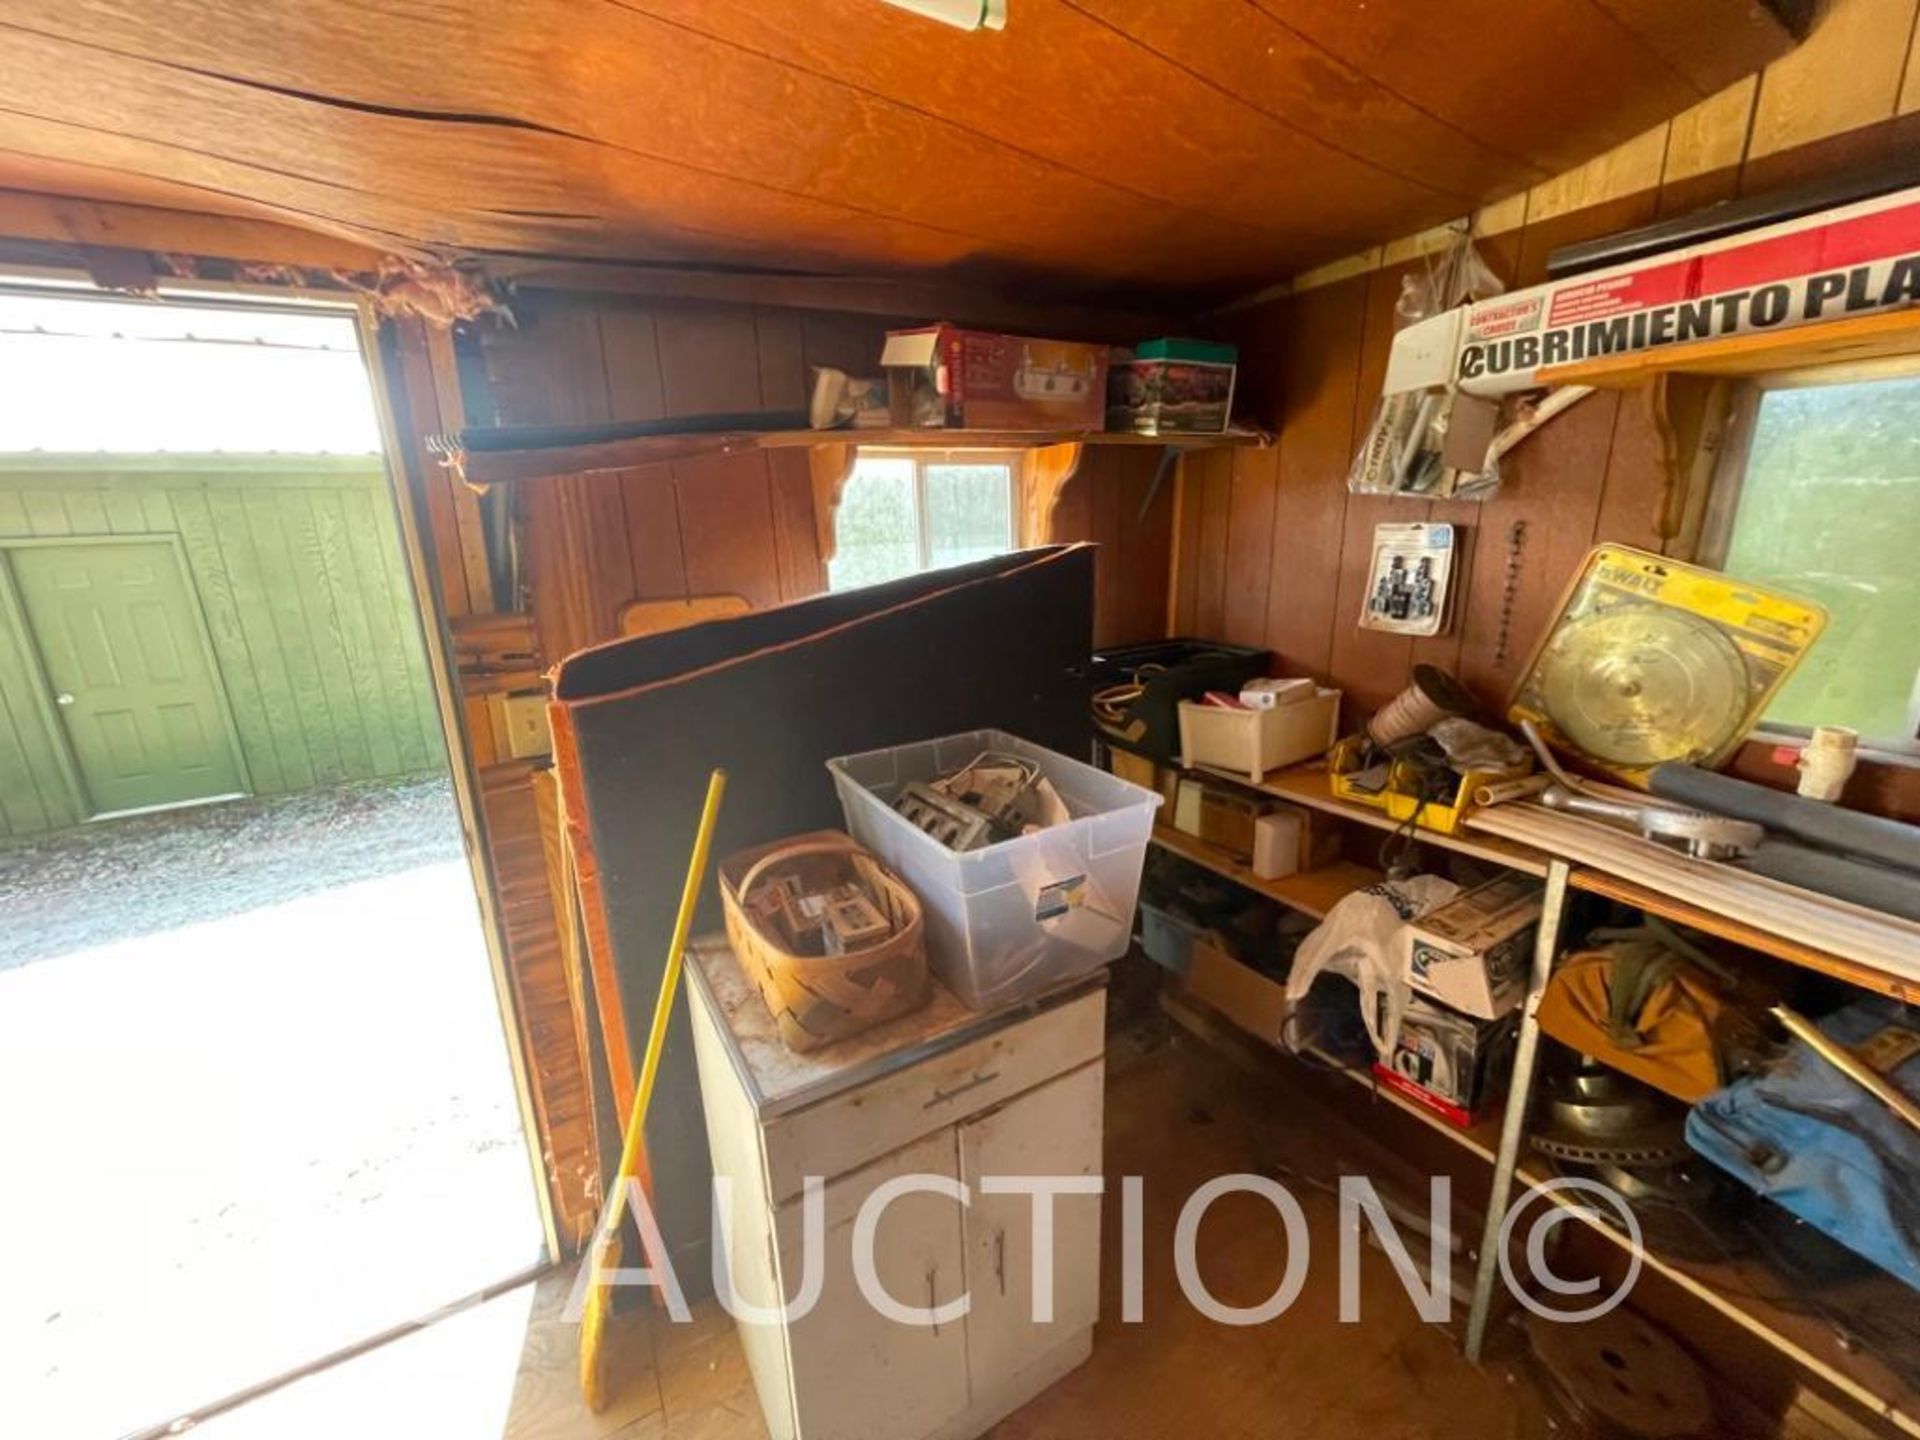 Storage Shed And Contents - Image 13 of 16